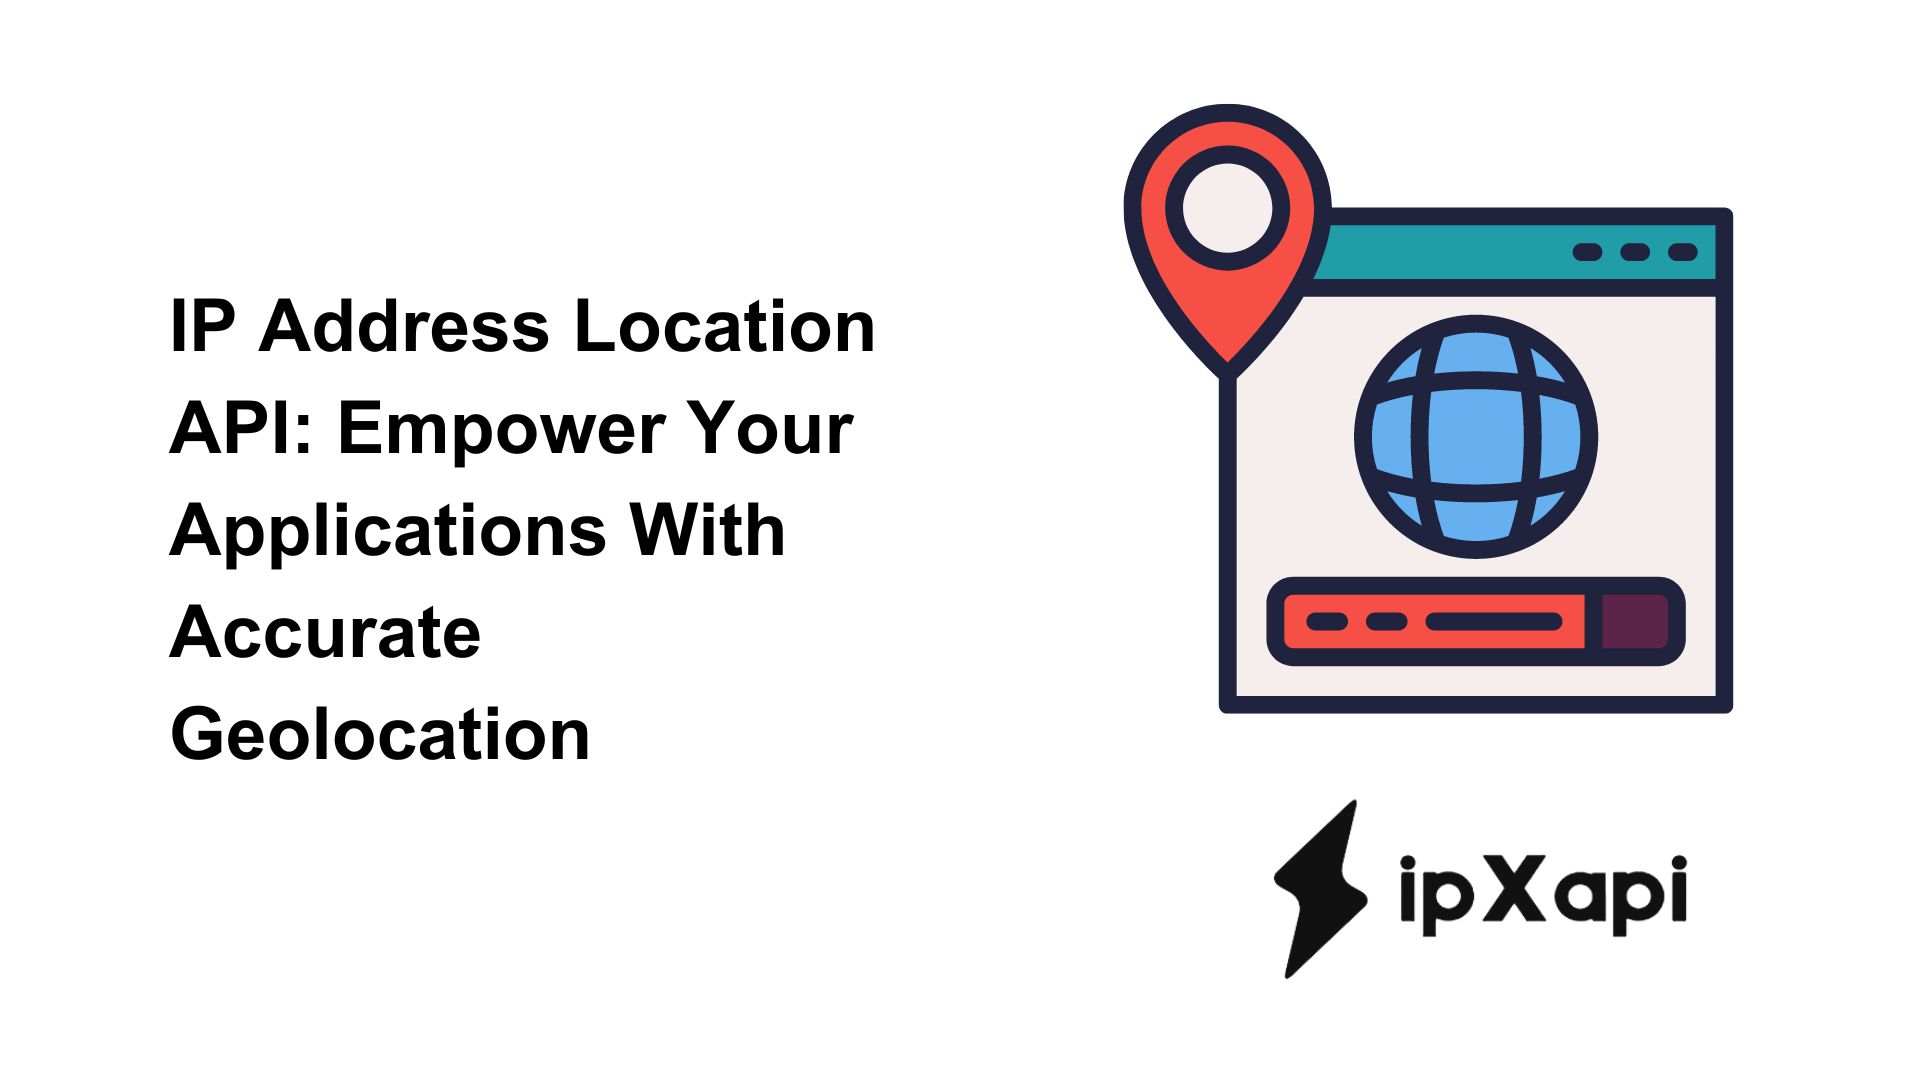 IP Address Location API: Empower Your Applications With Accurate Geolocation